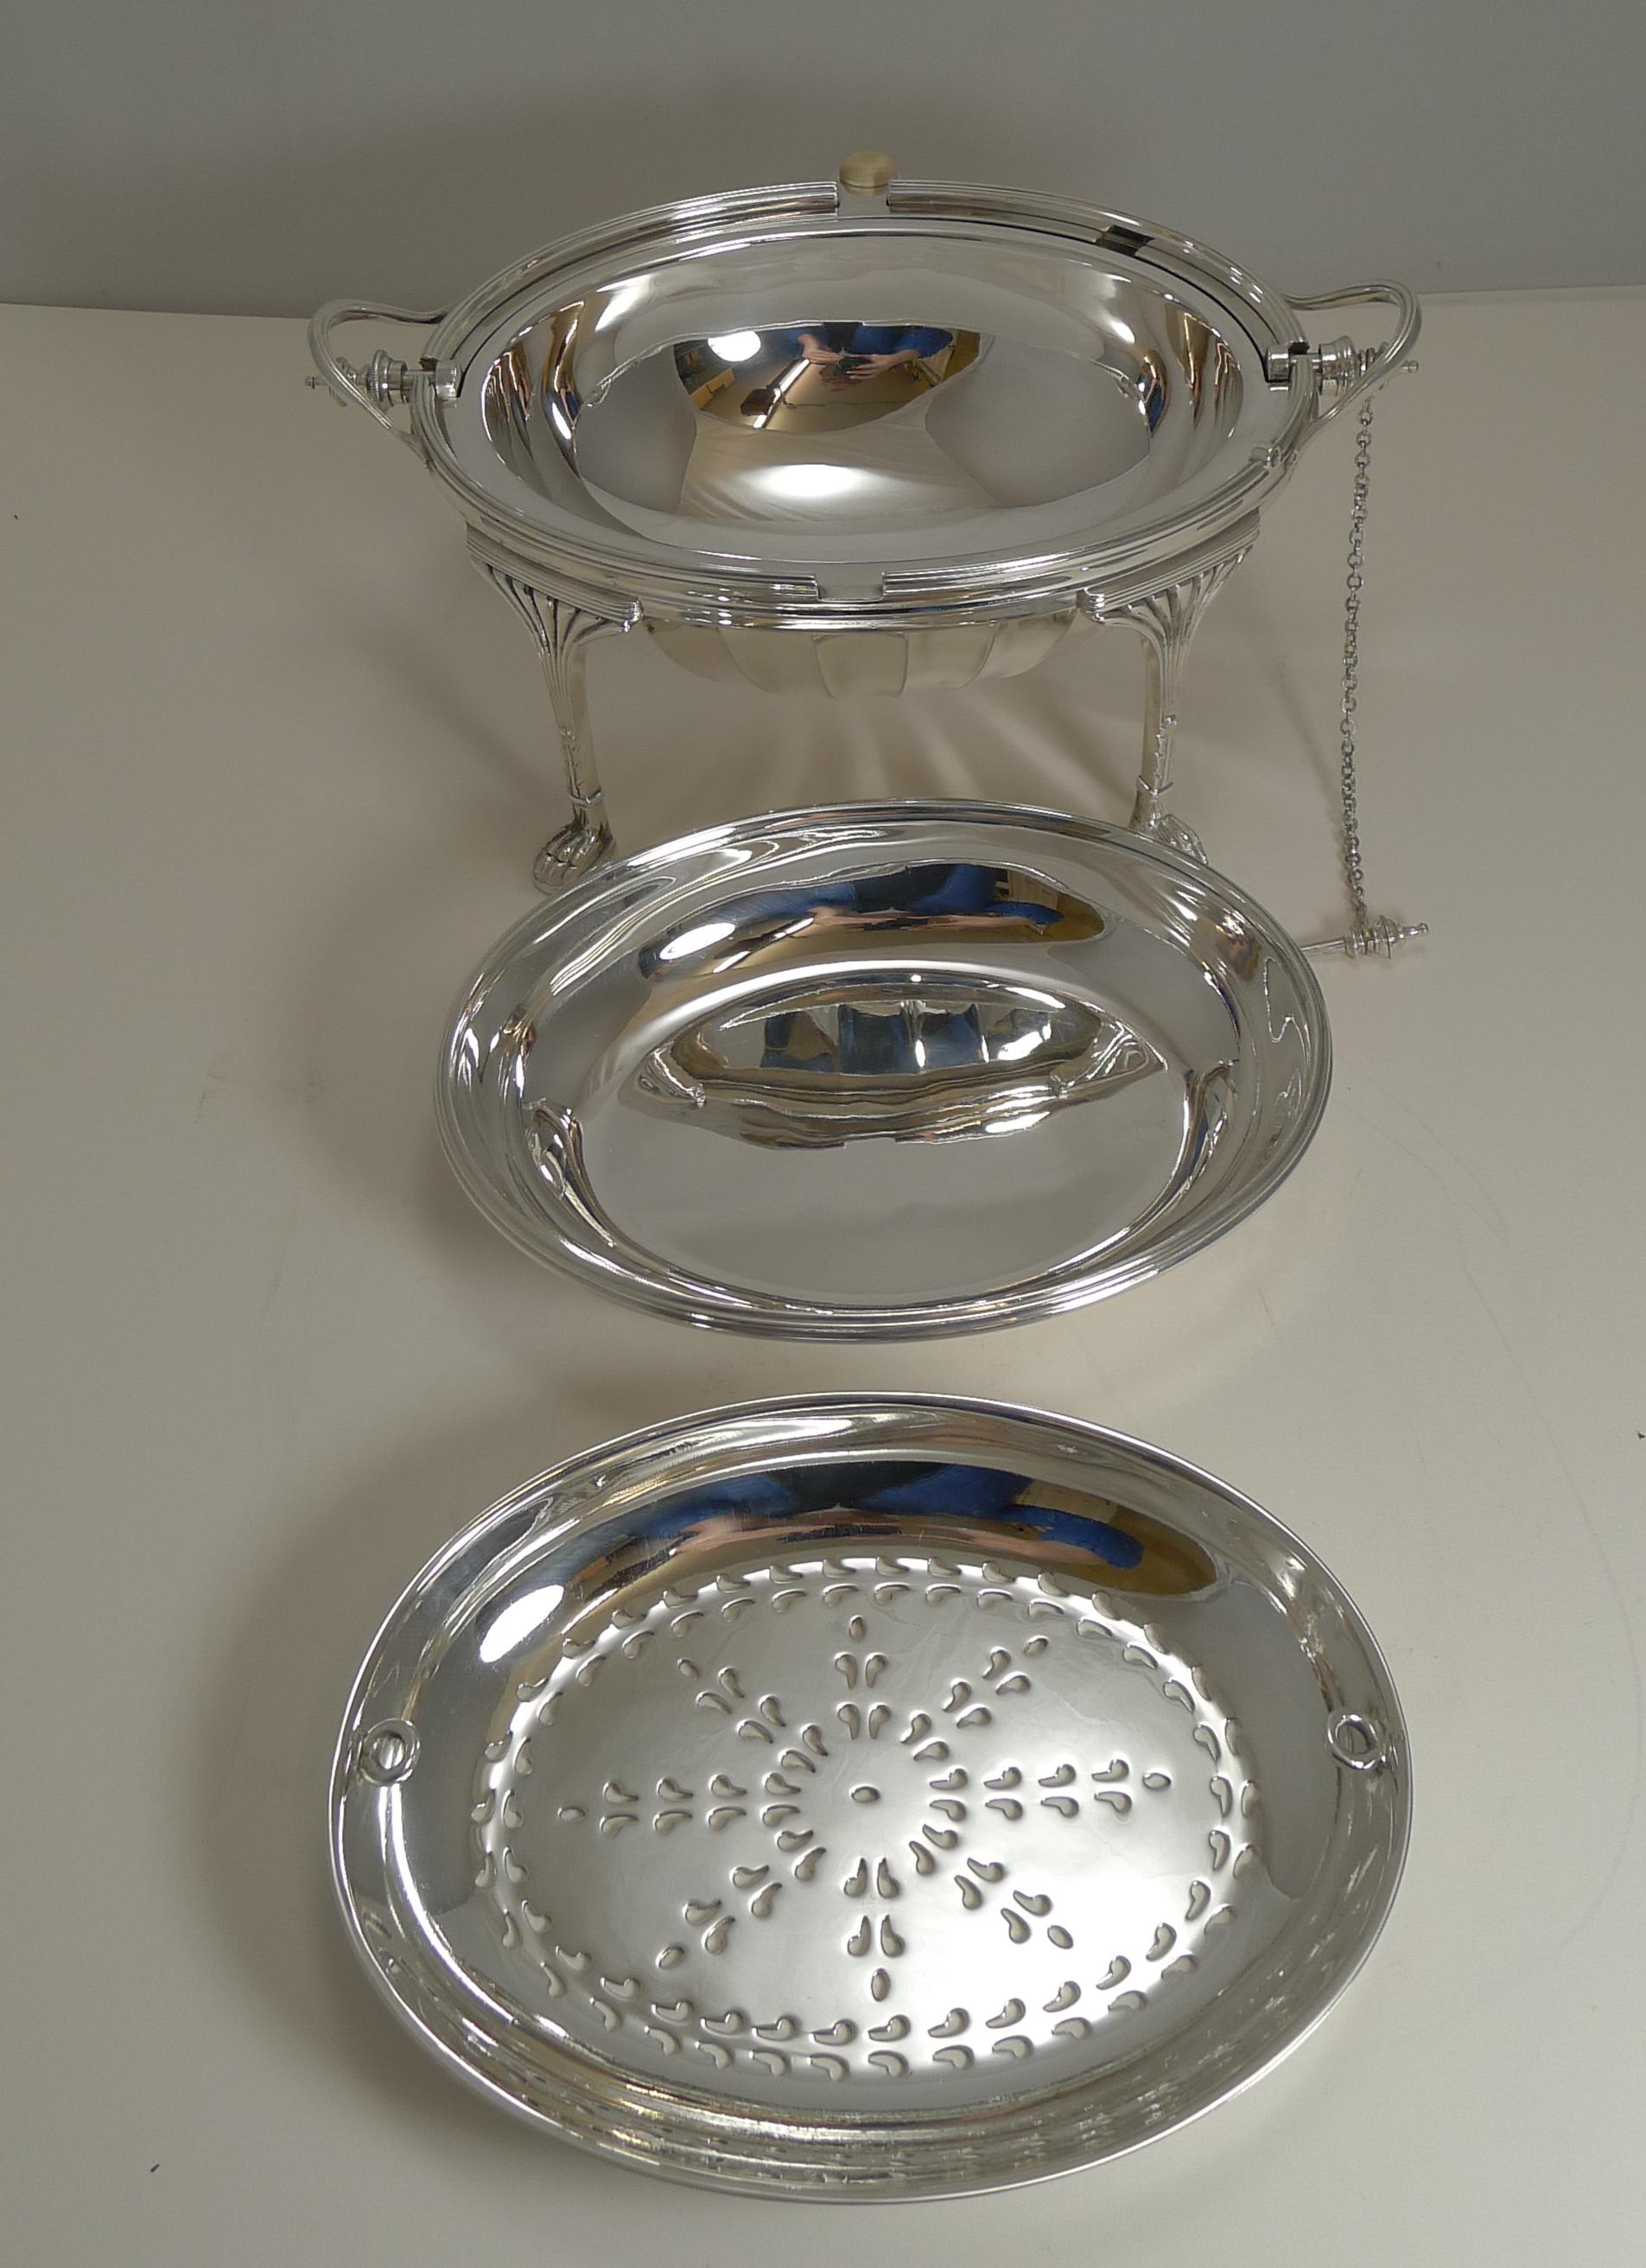 Antique English Silver Plated Revolving Breakfast / Serving Dish, Mappin & Webb 4